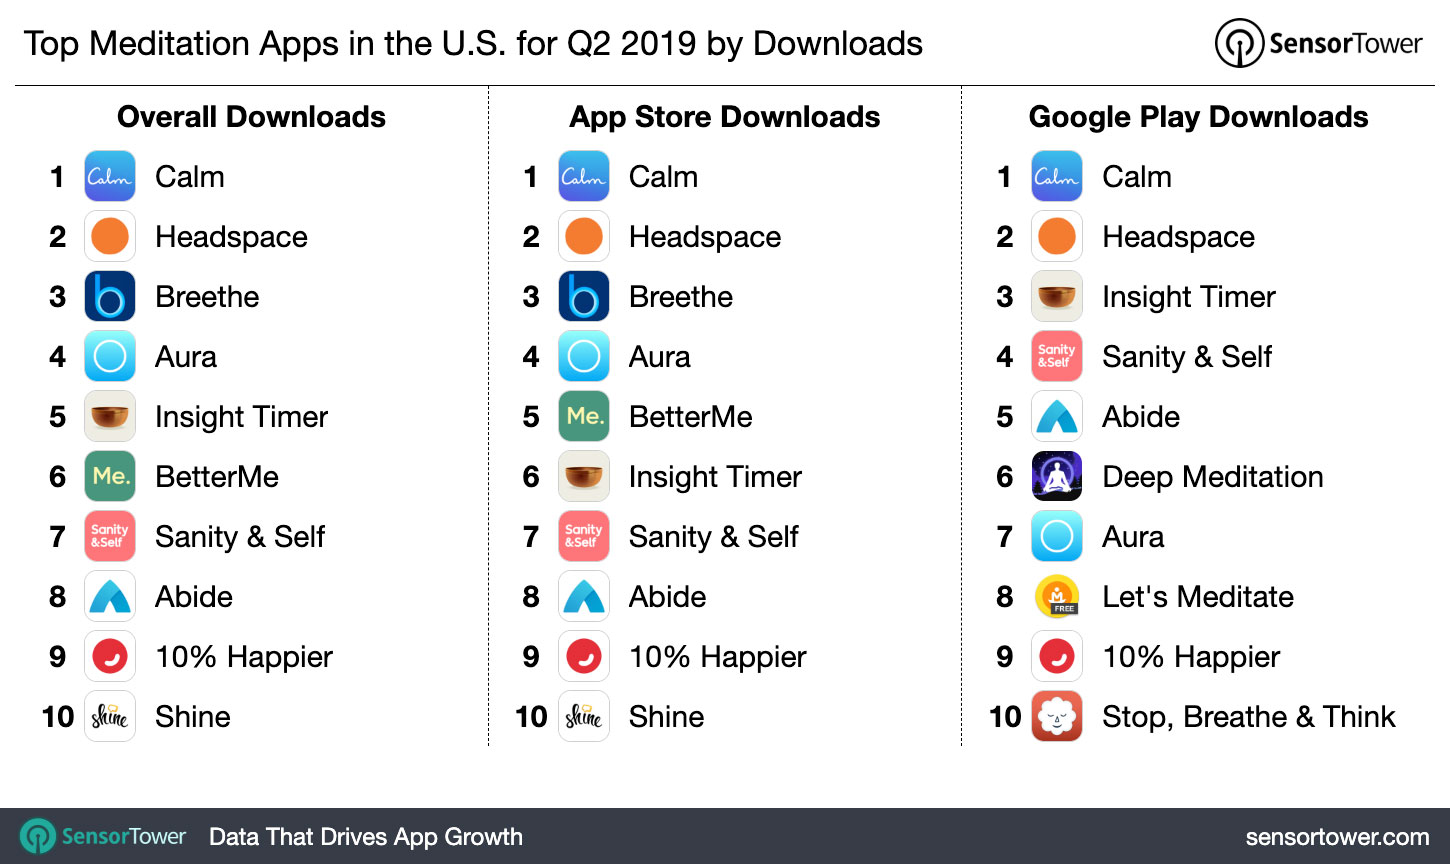 Top Meditation Apps in the U.S. for Q2 2019 by Downloads